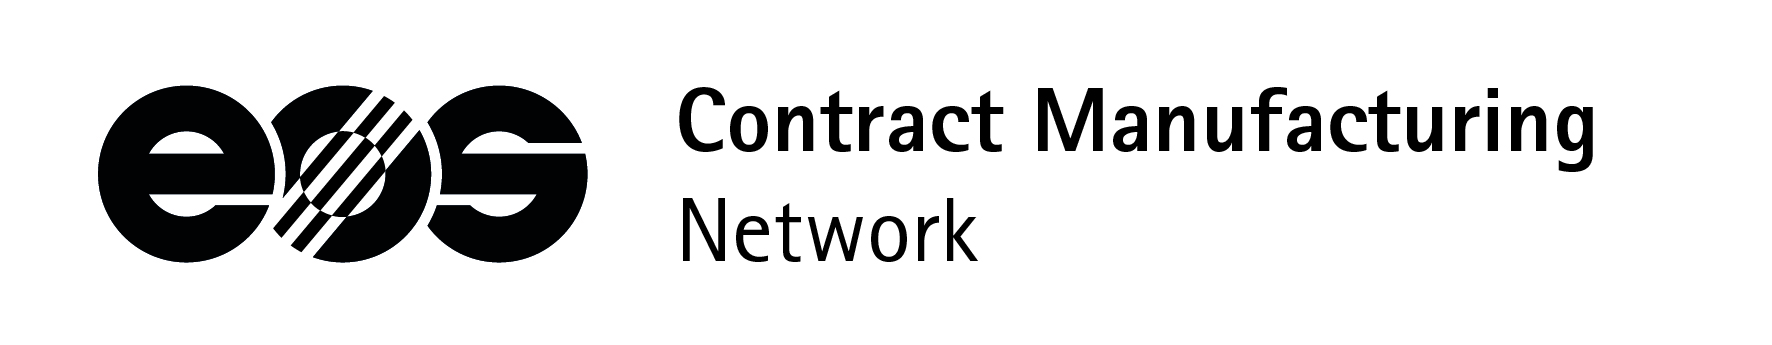 Contract manufacturing network for AM